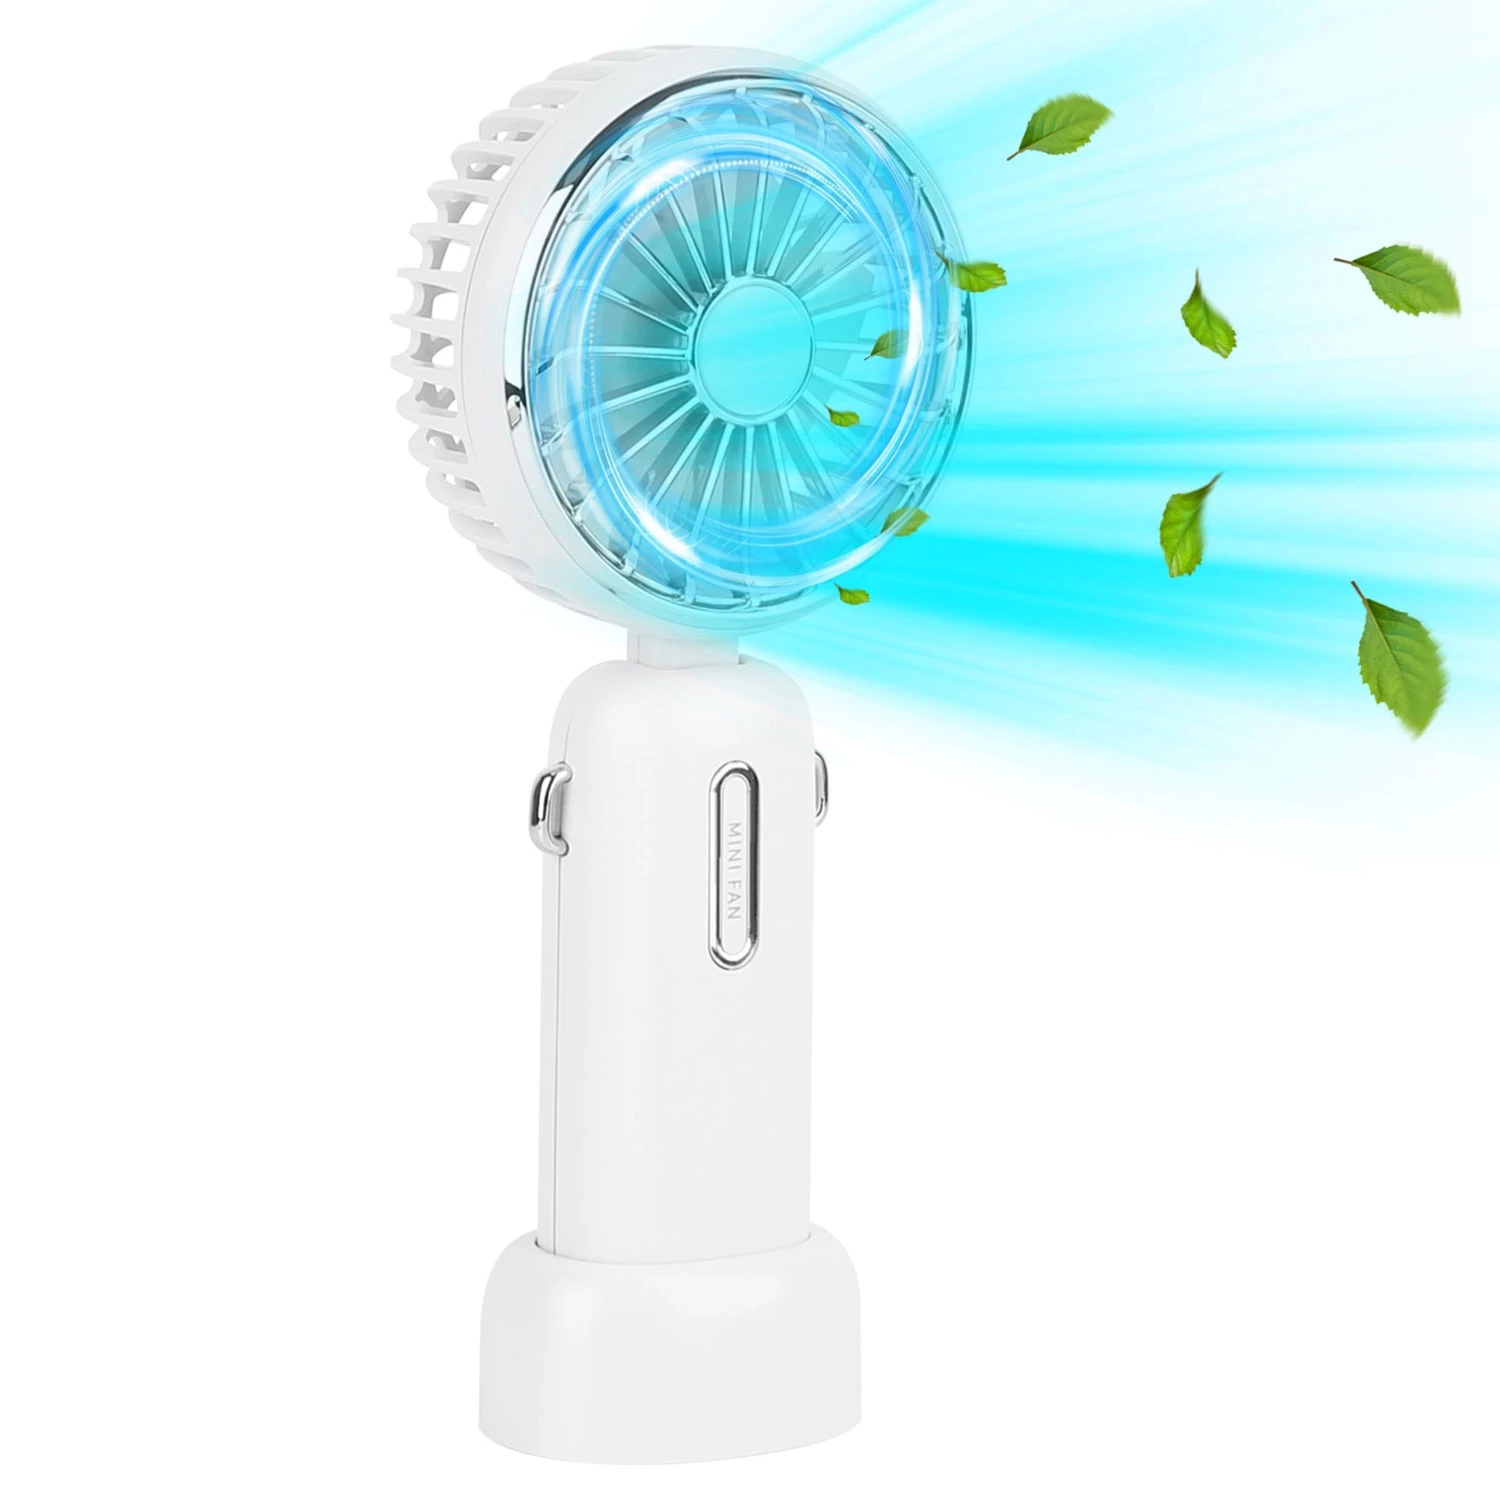 Pocket Personal Fan: Rechargeable, Quiet, 3 Speeds, Portable Handheld with Removable Base